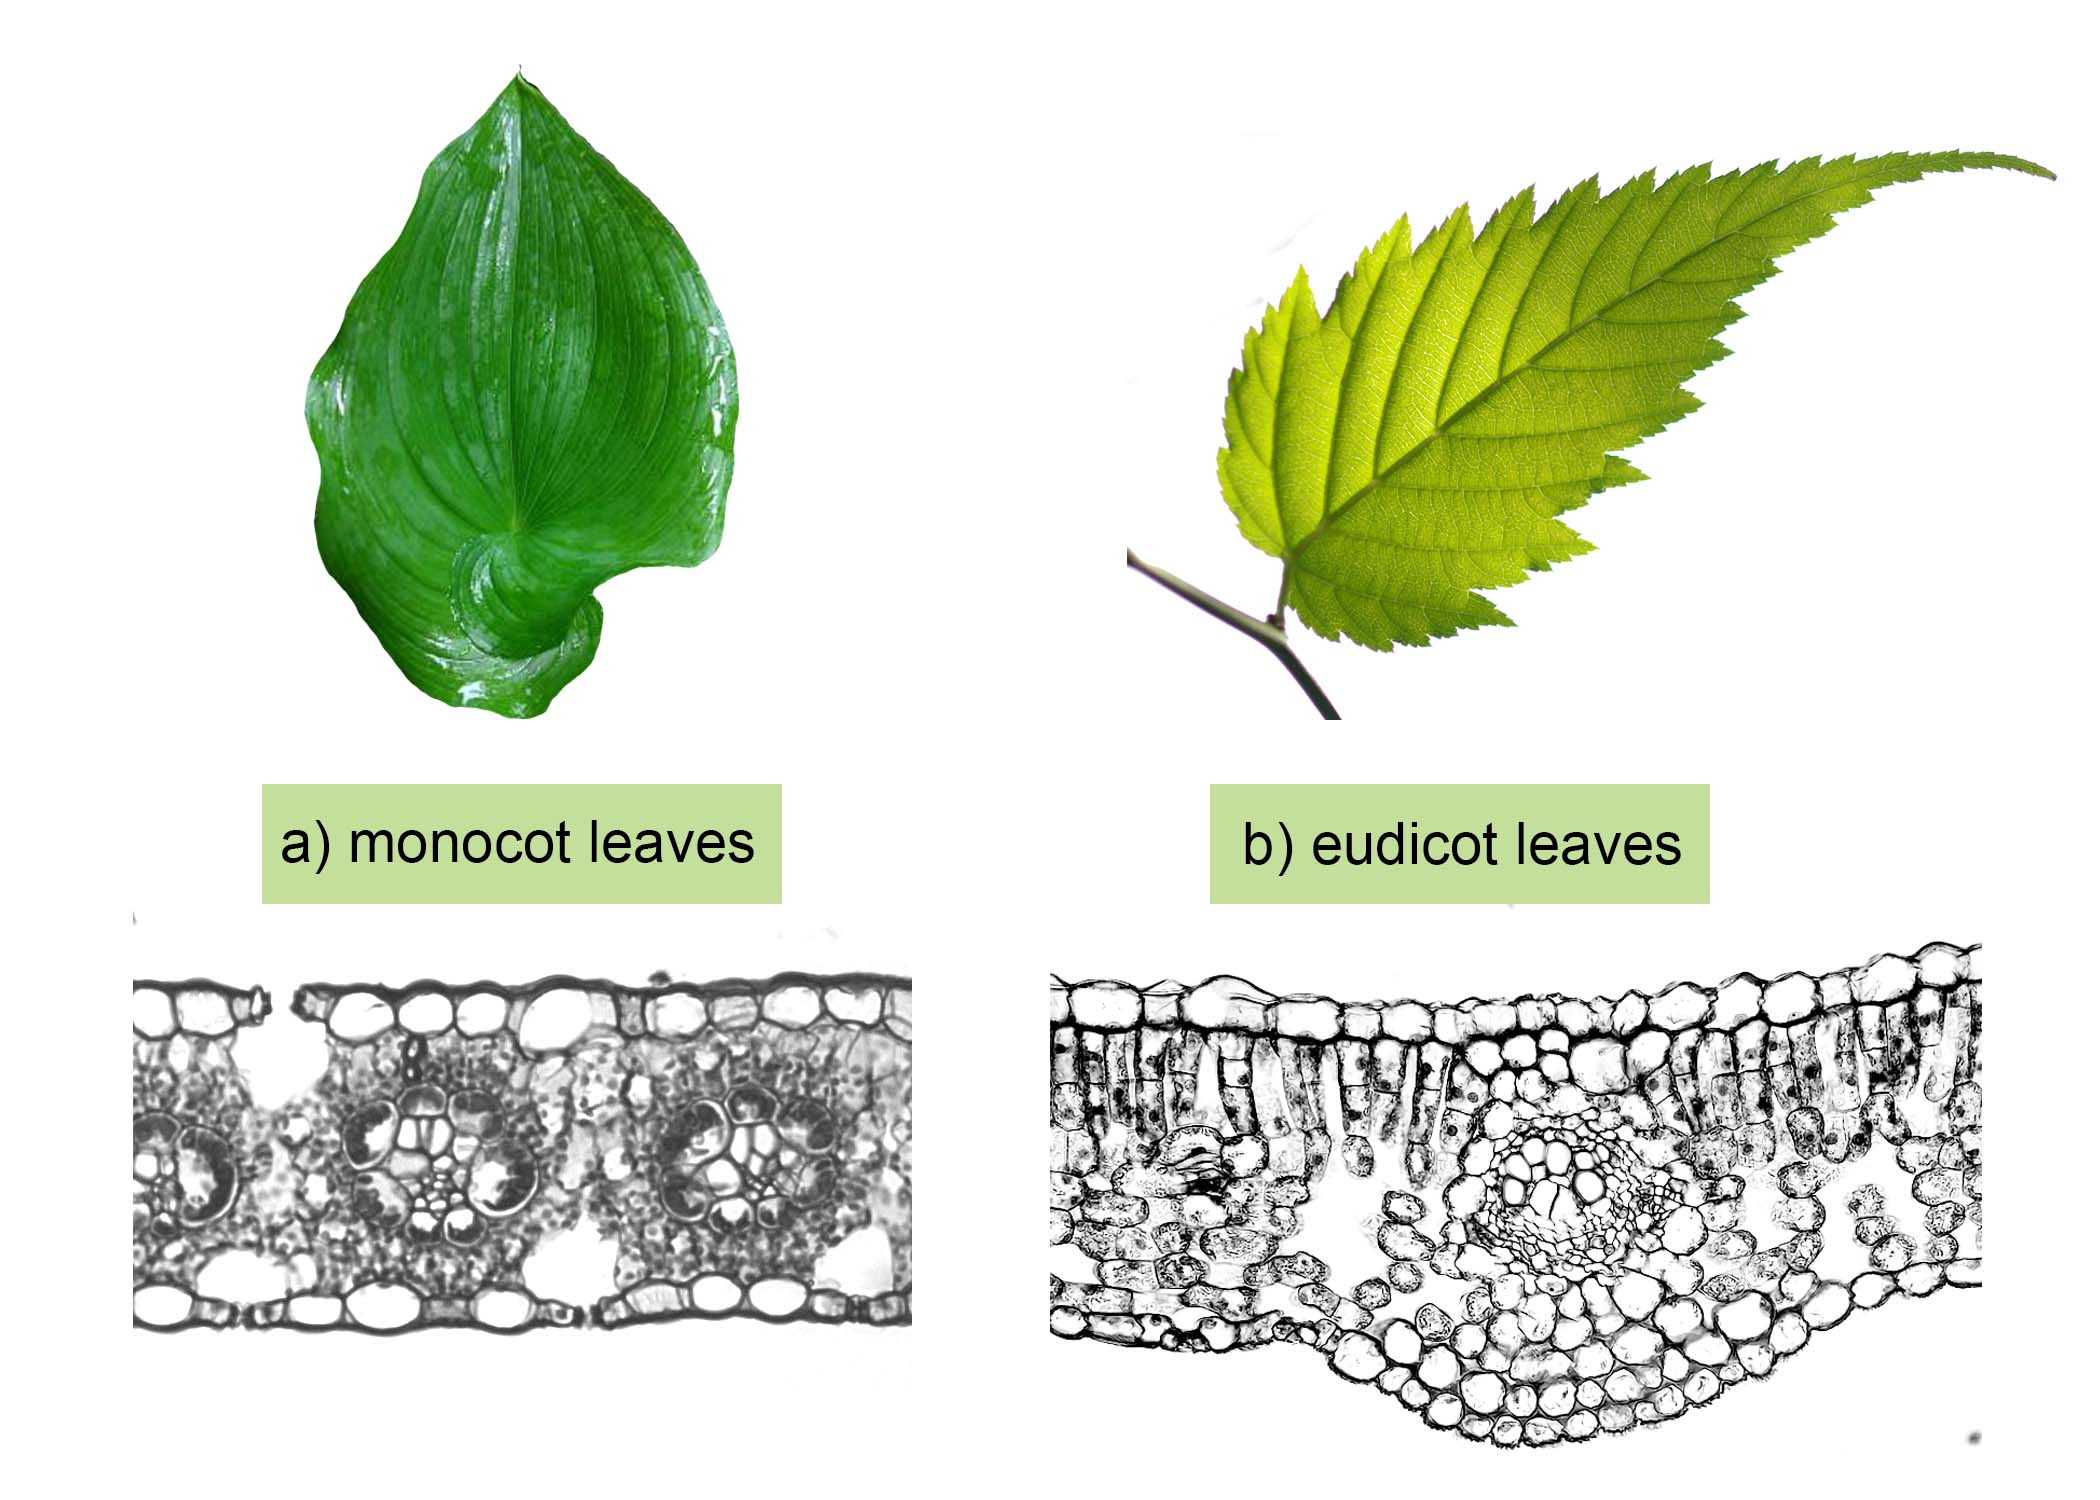 Comparison of monocot and eudicot leaf anatomy and morphology